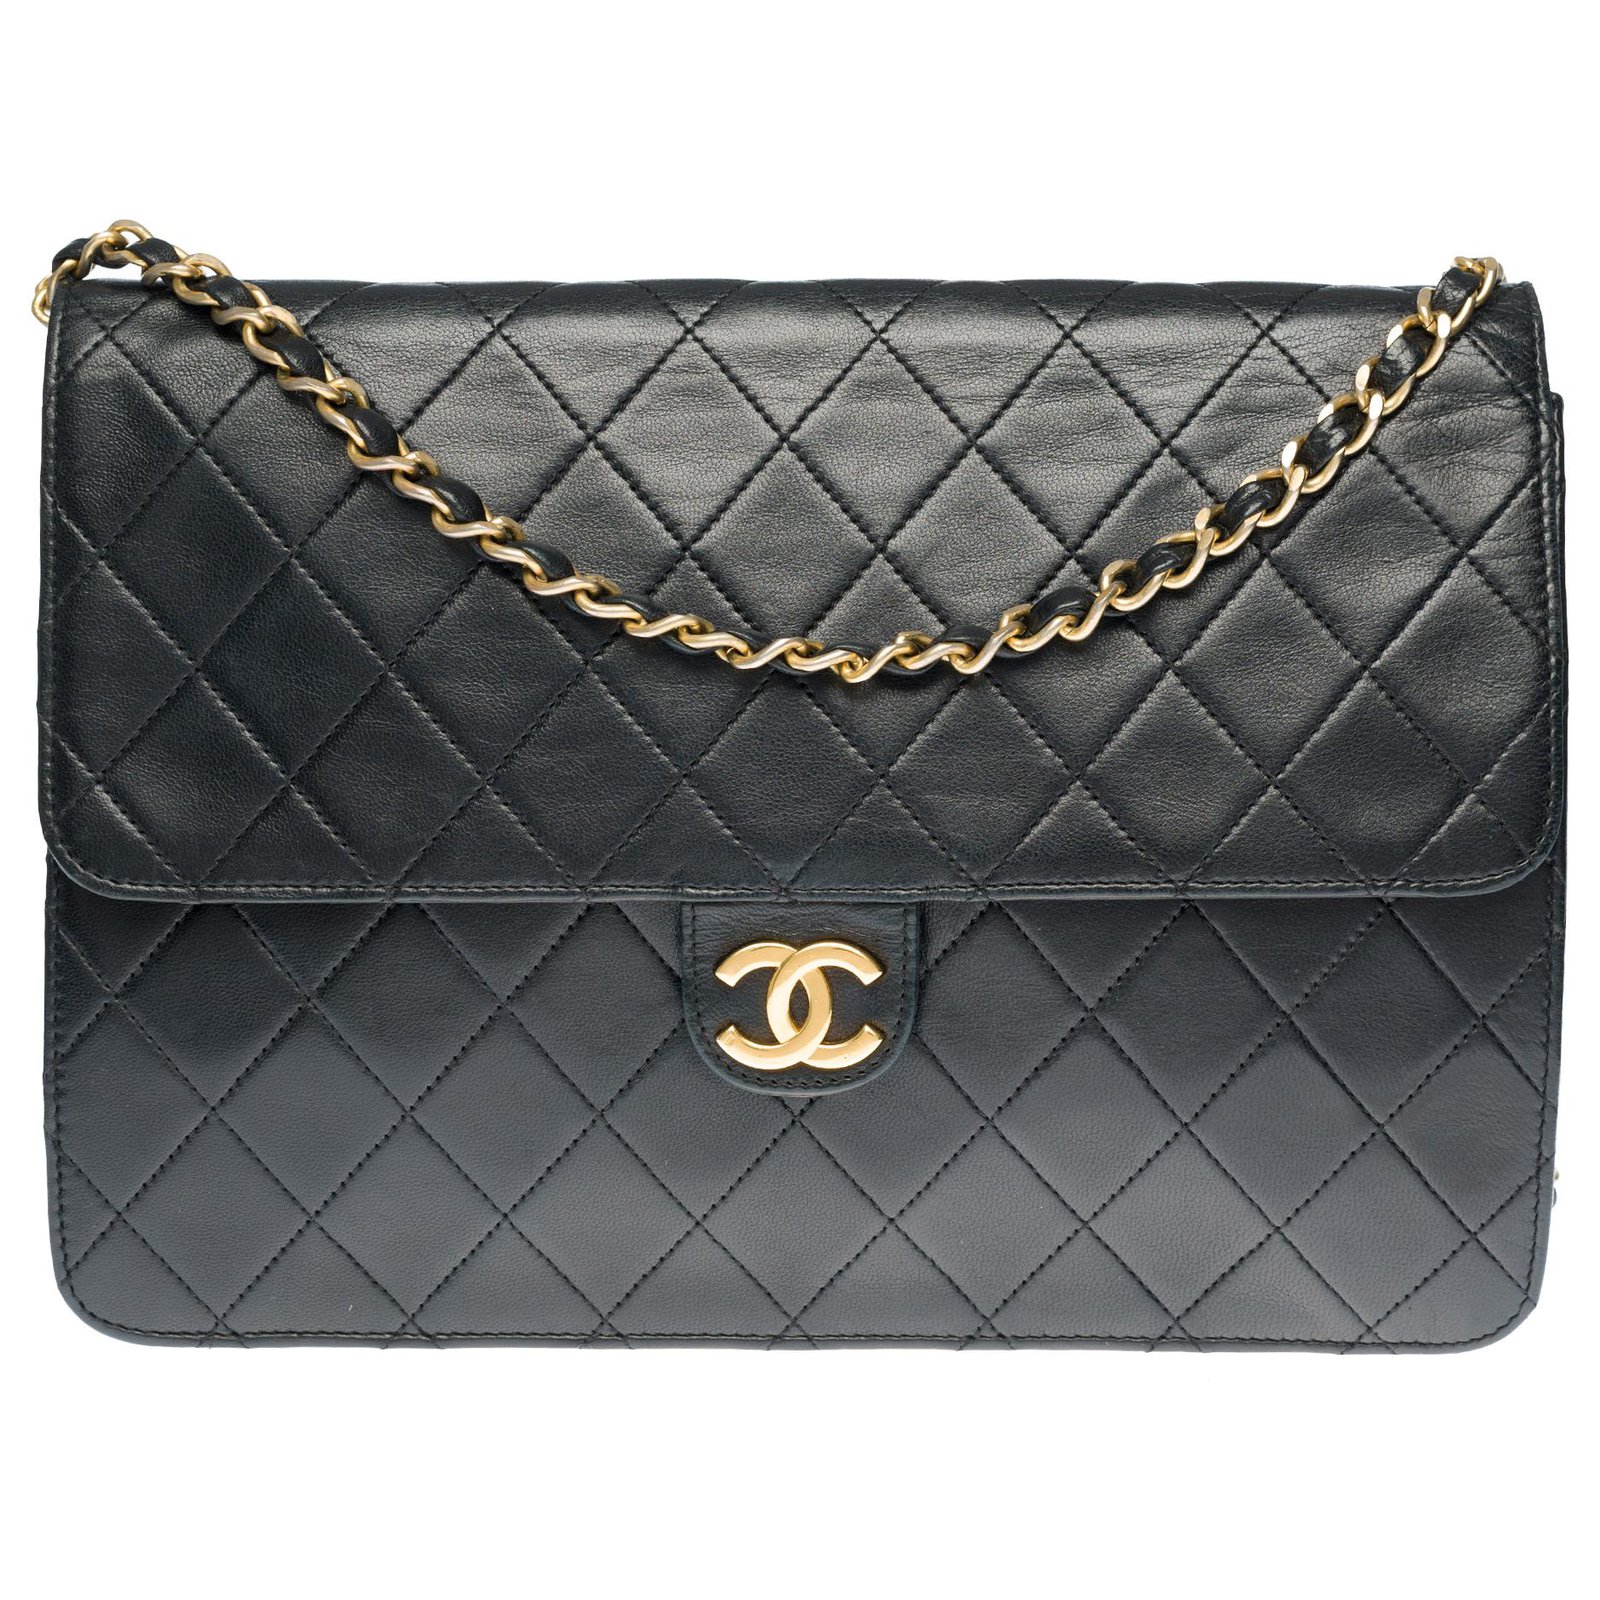 Timeless Chanel Classic handbag 25cm in black quilted leather ...